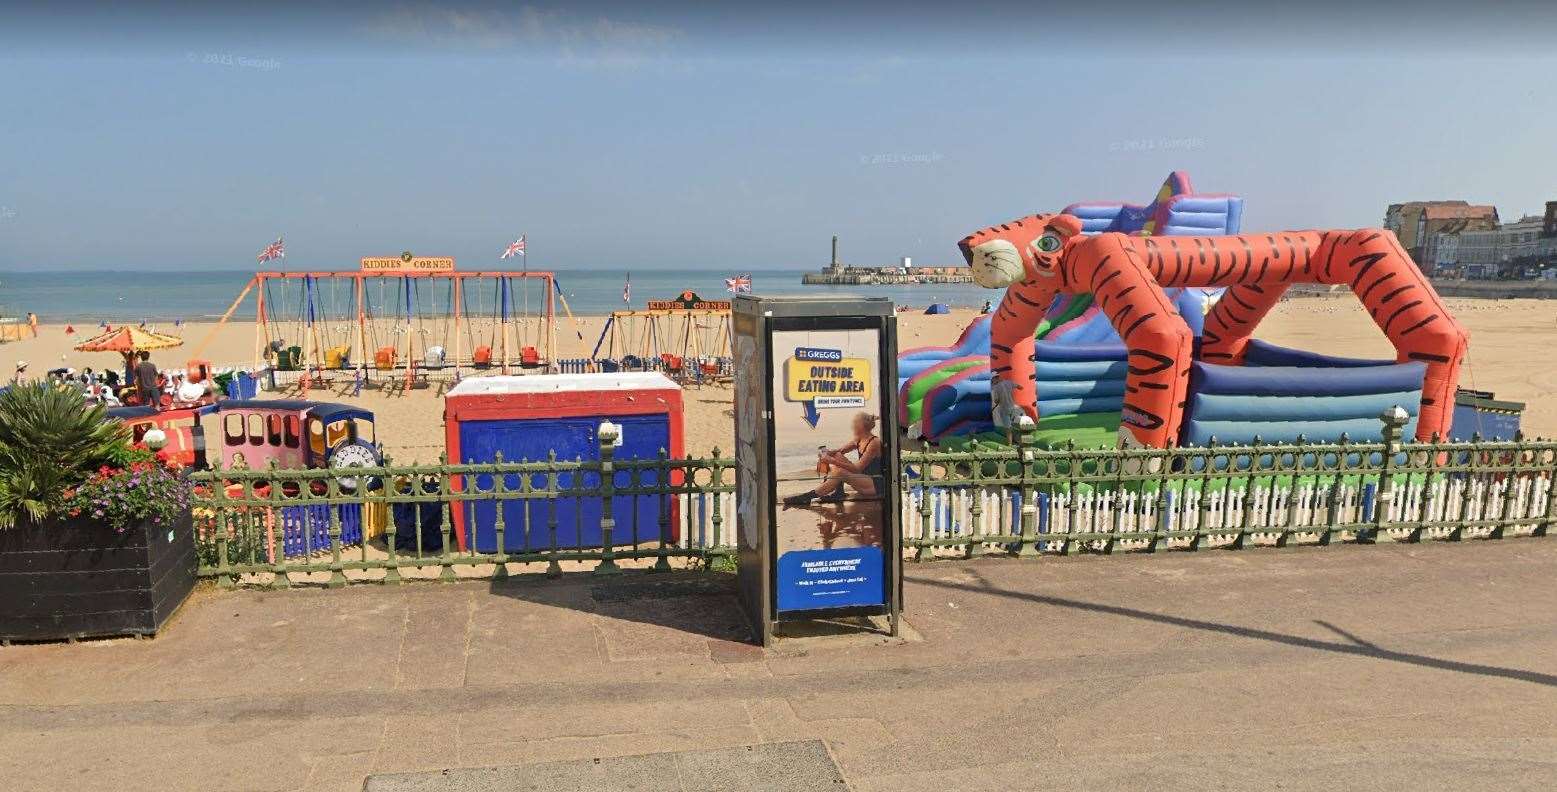 Kiddies Corner in Margate was taped off following the incident. Picture: Google